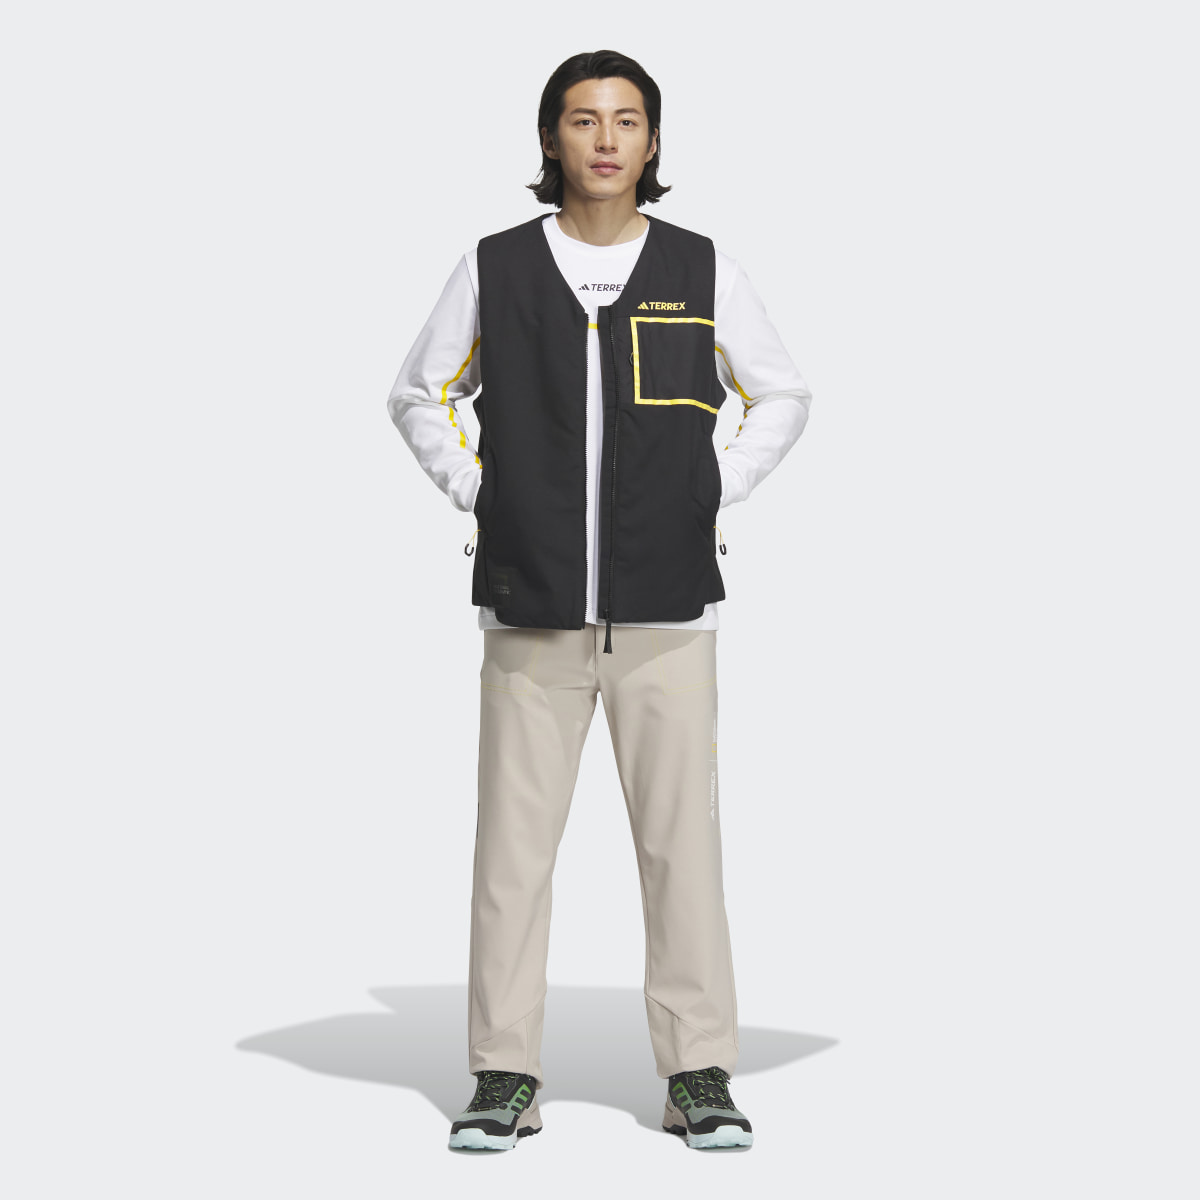 Adidas National Geographic Fleece-Lined Vest. 6